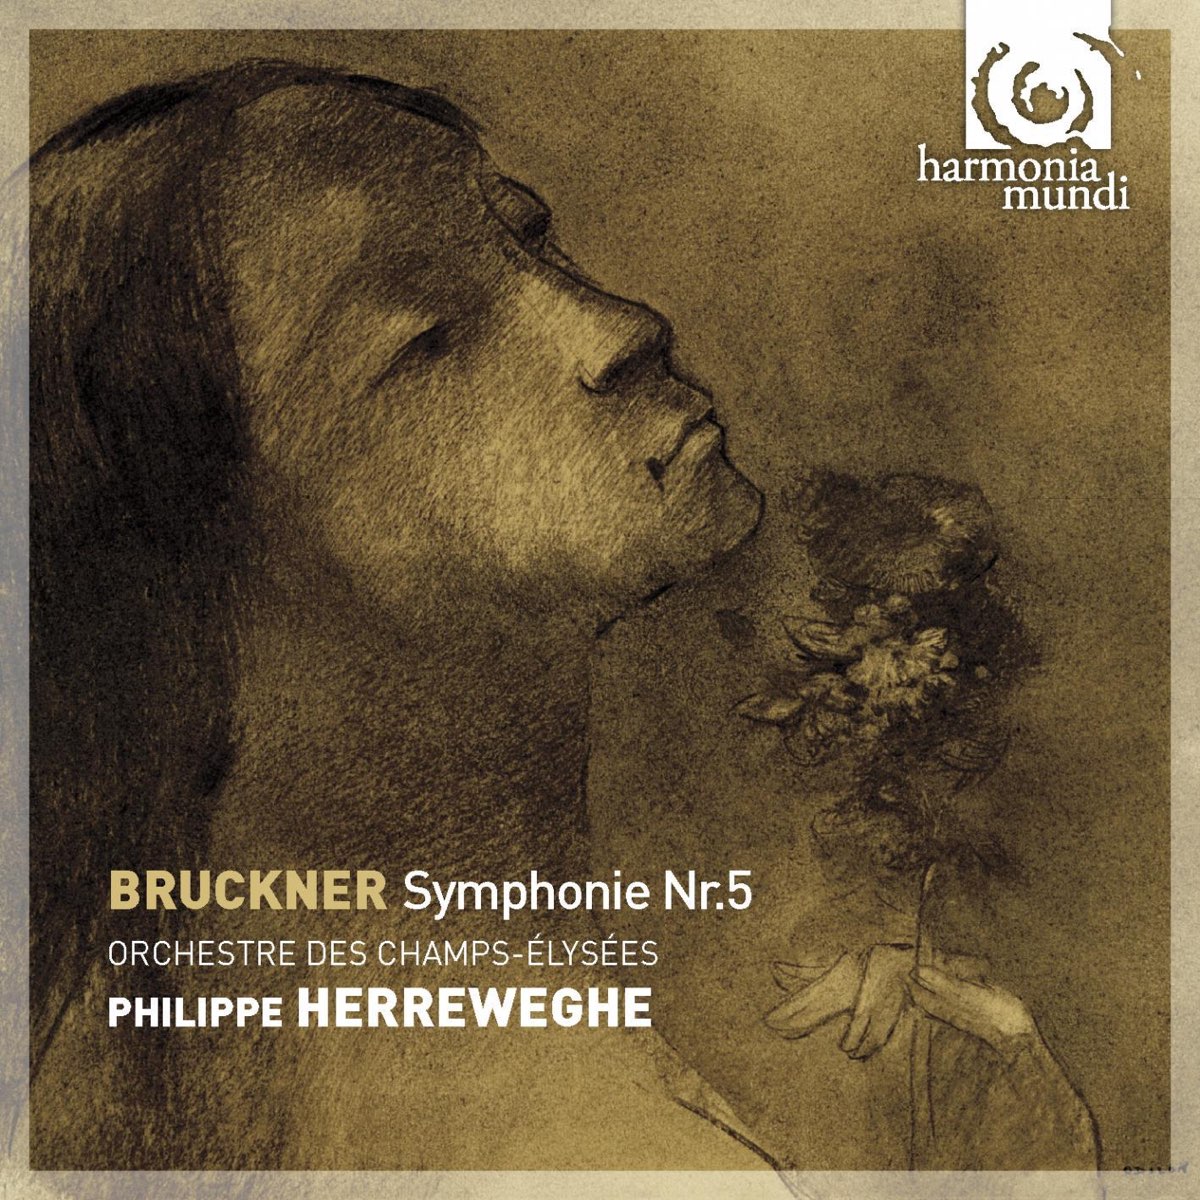 ‎Bruckner: Symphony No. 5 by Philippe Herreweghe & Orchestre des Champs ...